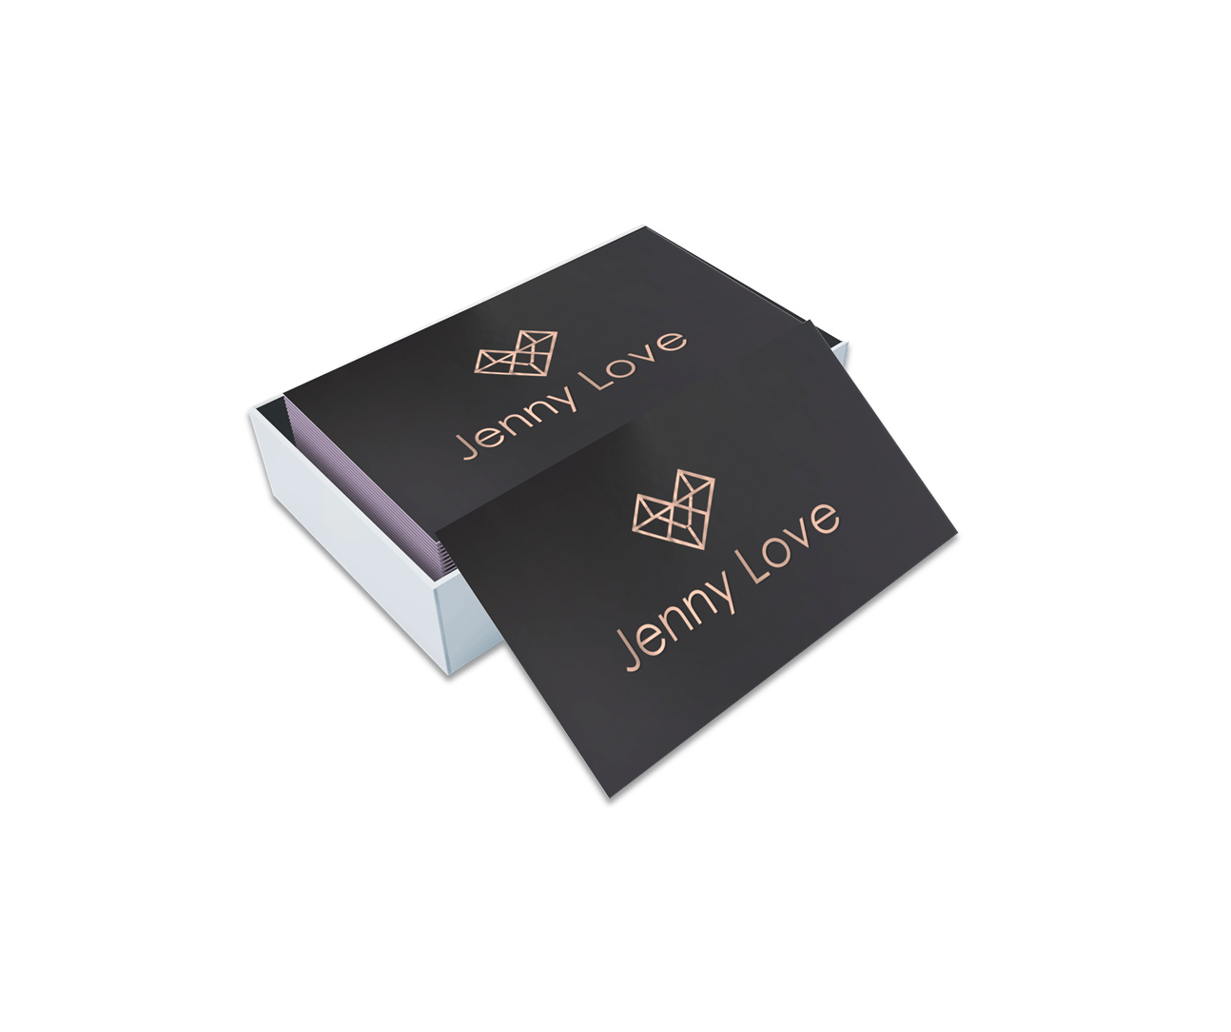 Jewelry Design Business Cards